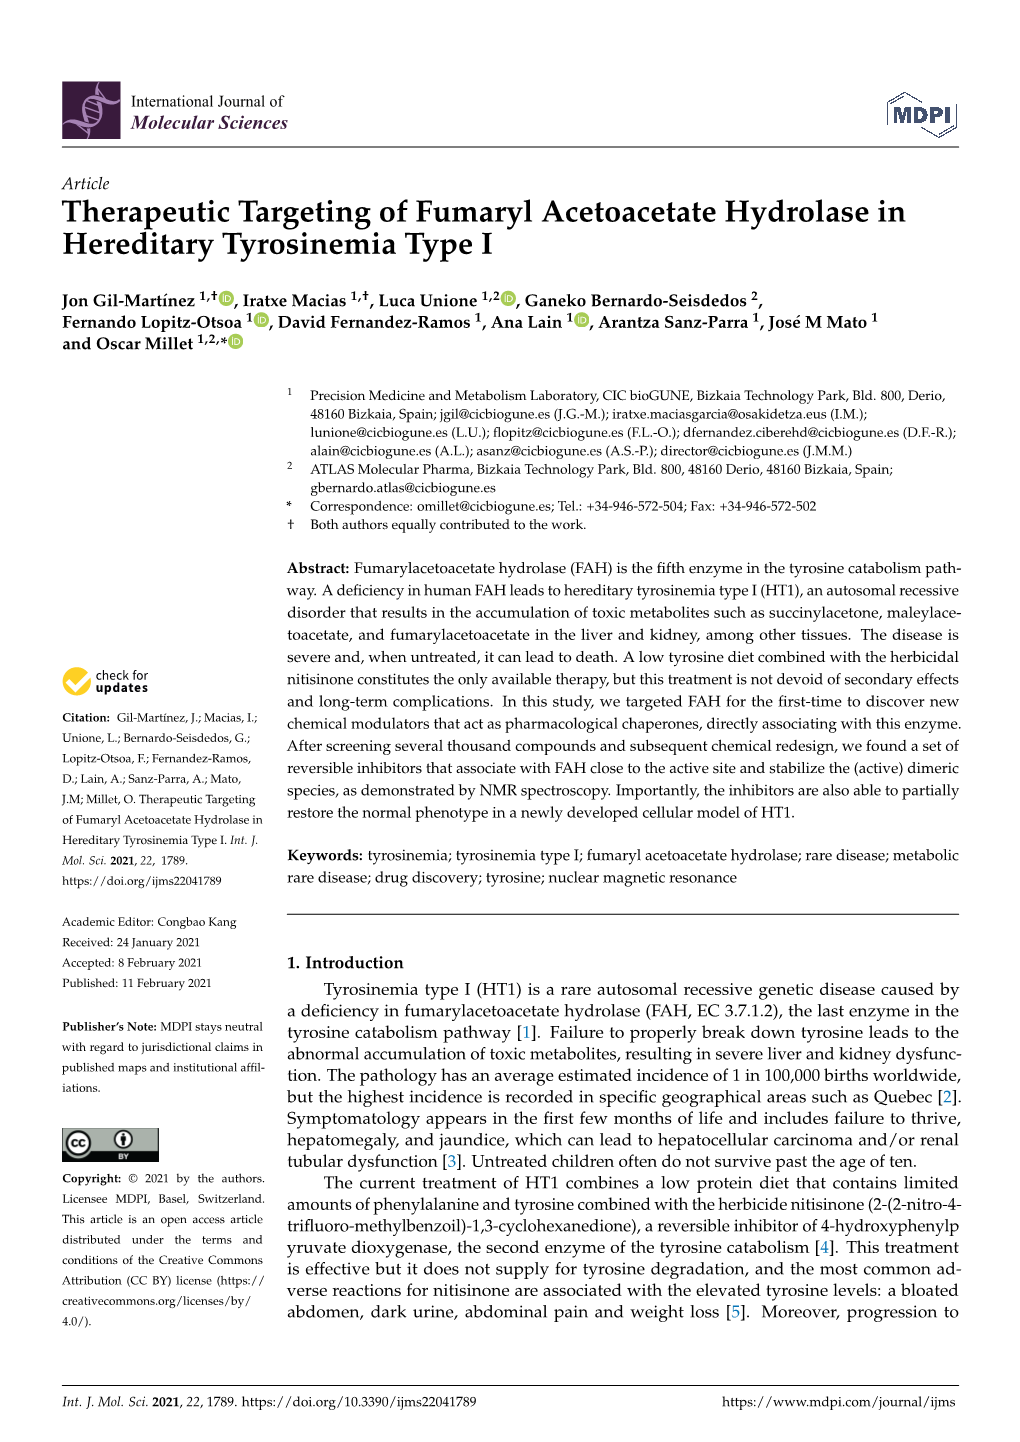 Therapeutic Targeting of Fumaryl Acetoacetate Hydrolase in Hereditary Tyrosinemia Type I